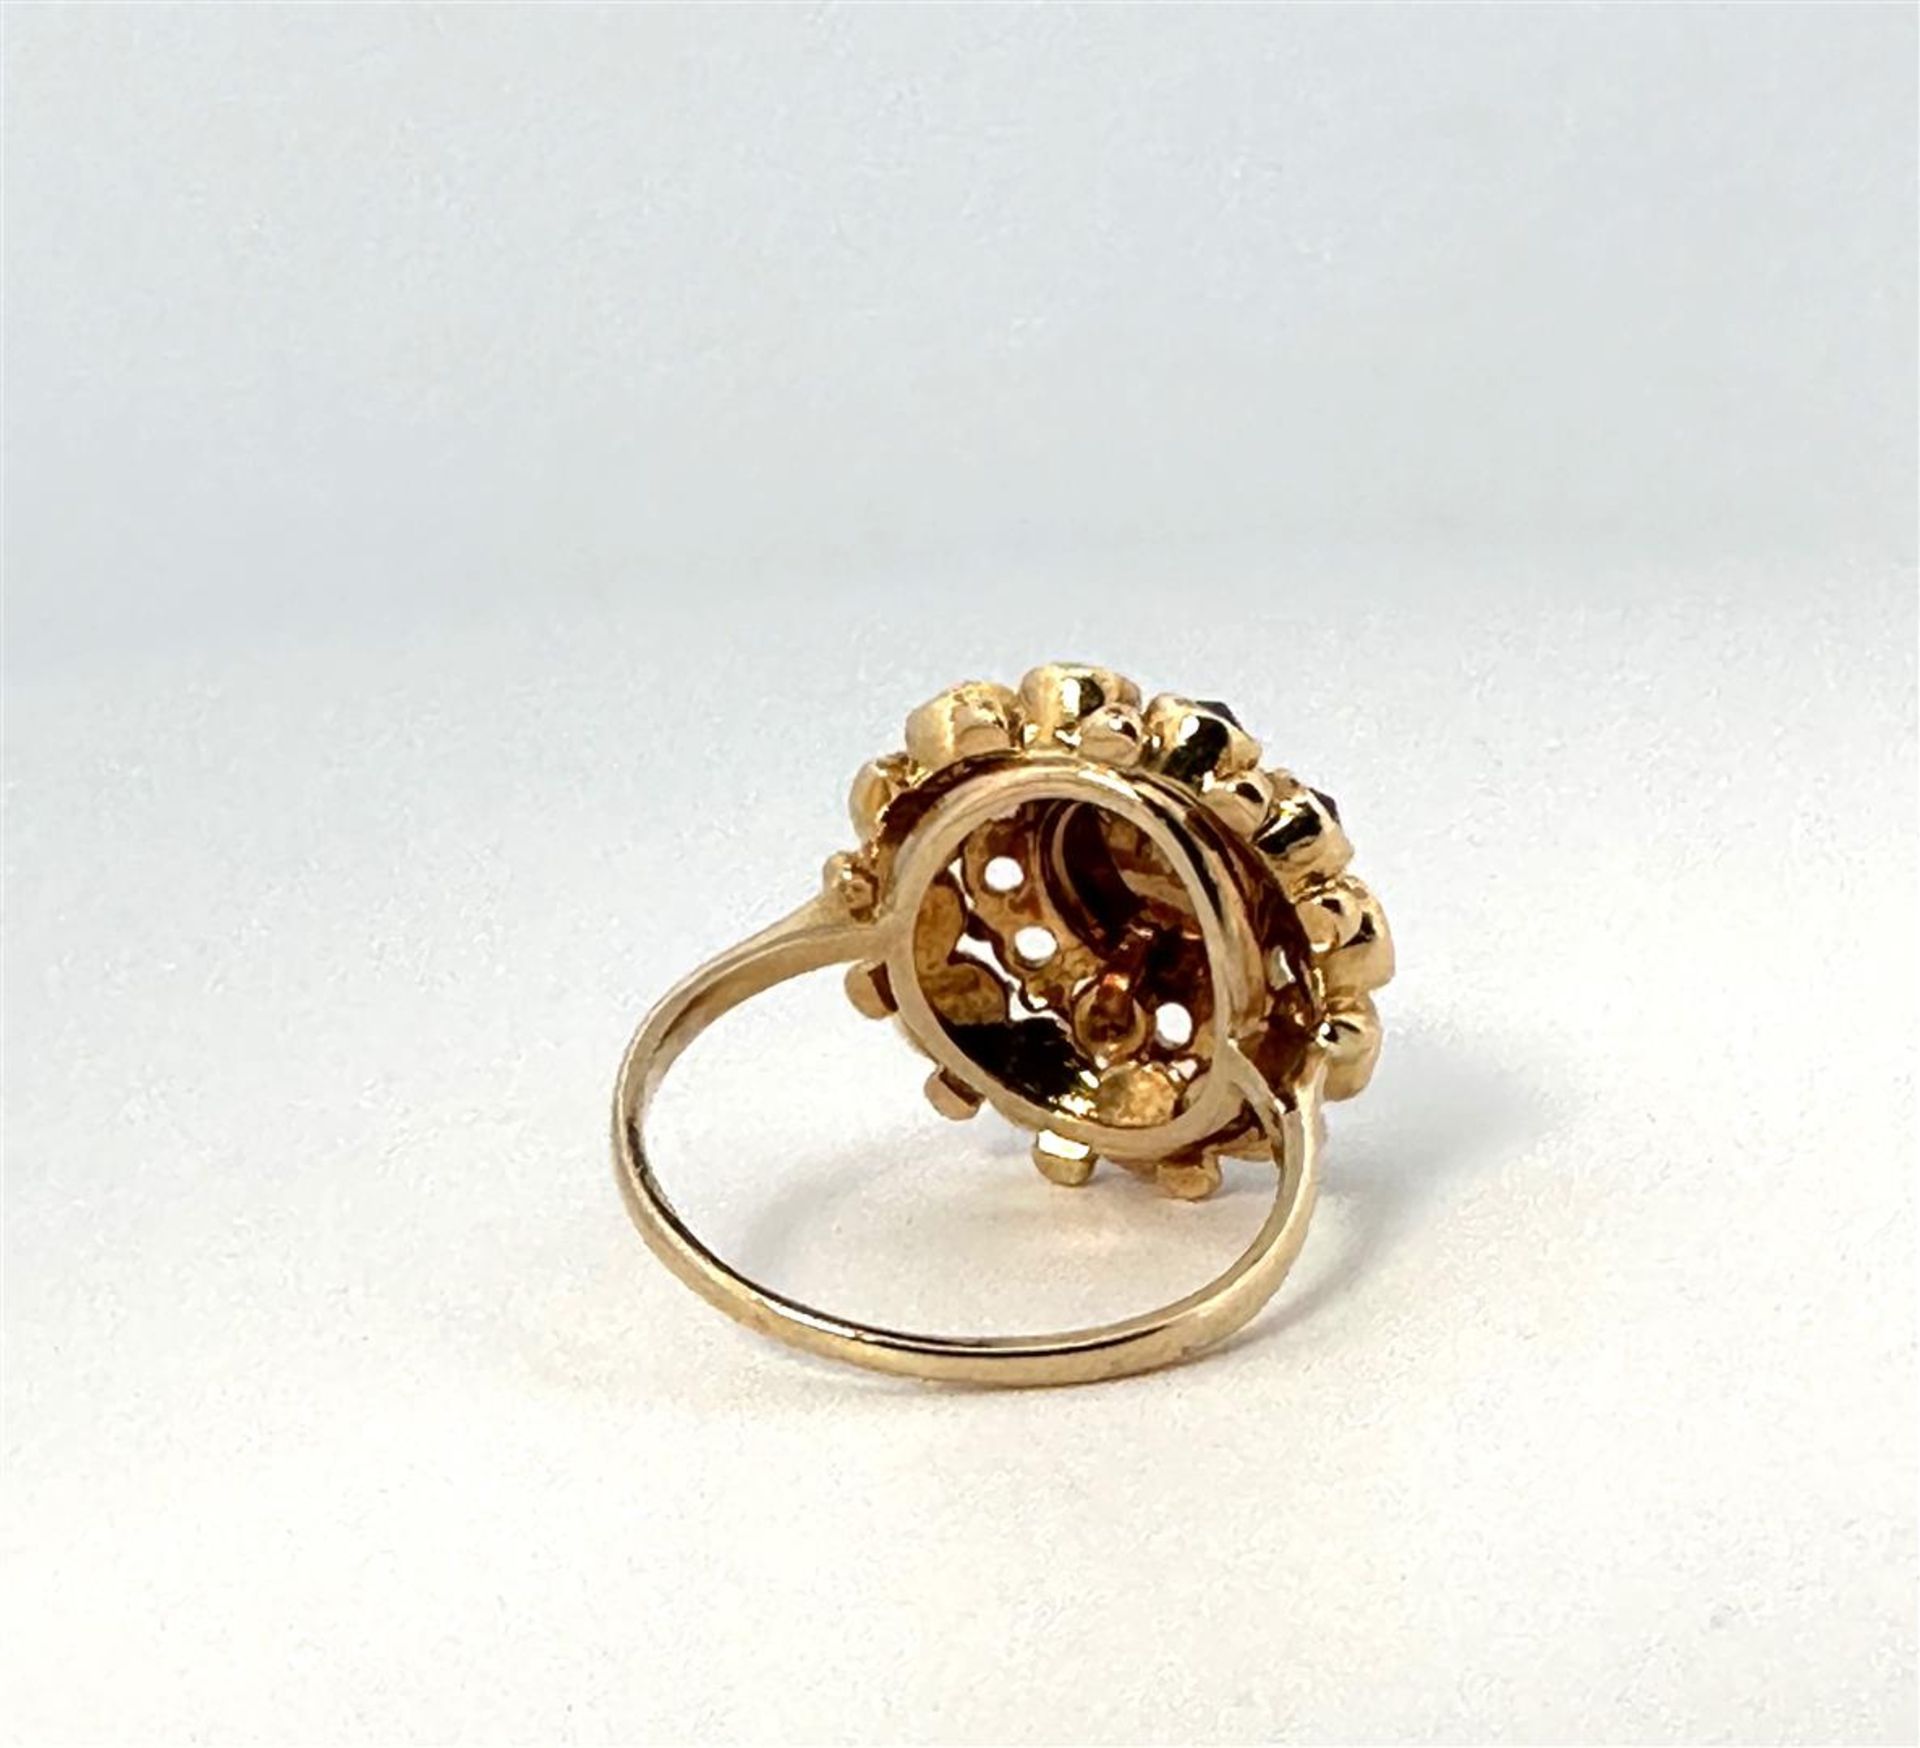 14kt yellow gold rosette ring set with garnet.
The ring is set with 1 central stone, rose cut of app - Bild 3 aus 4